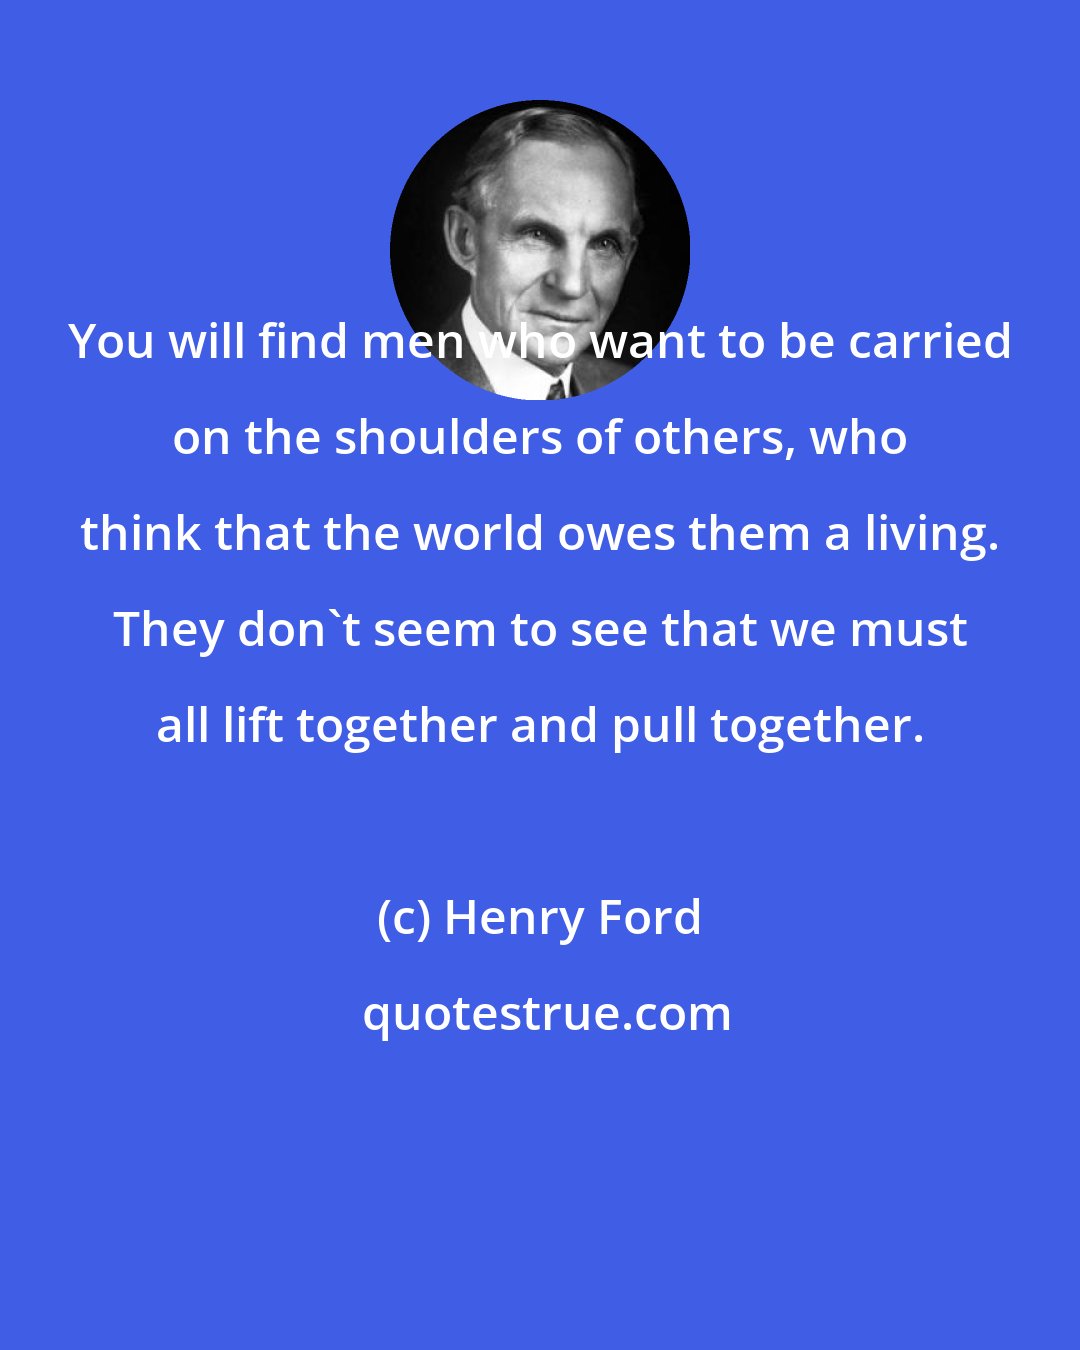 Henry Ford: You will find men who want to be carried on the shoulders of others, who think that the world owes them a living. They don't seem to see that we must all lift together and pull together.